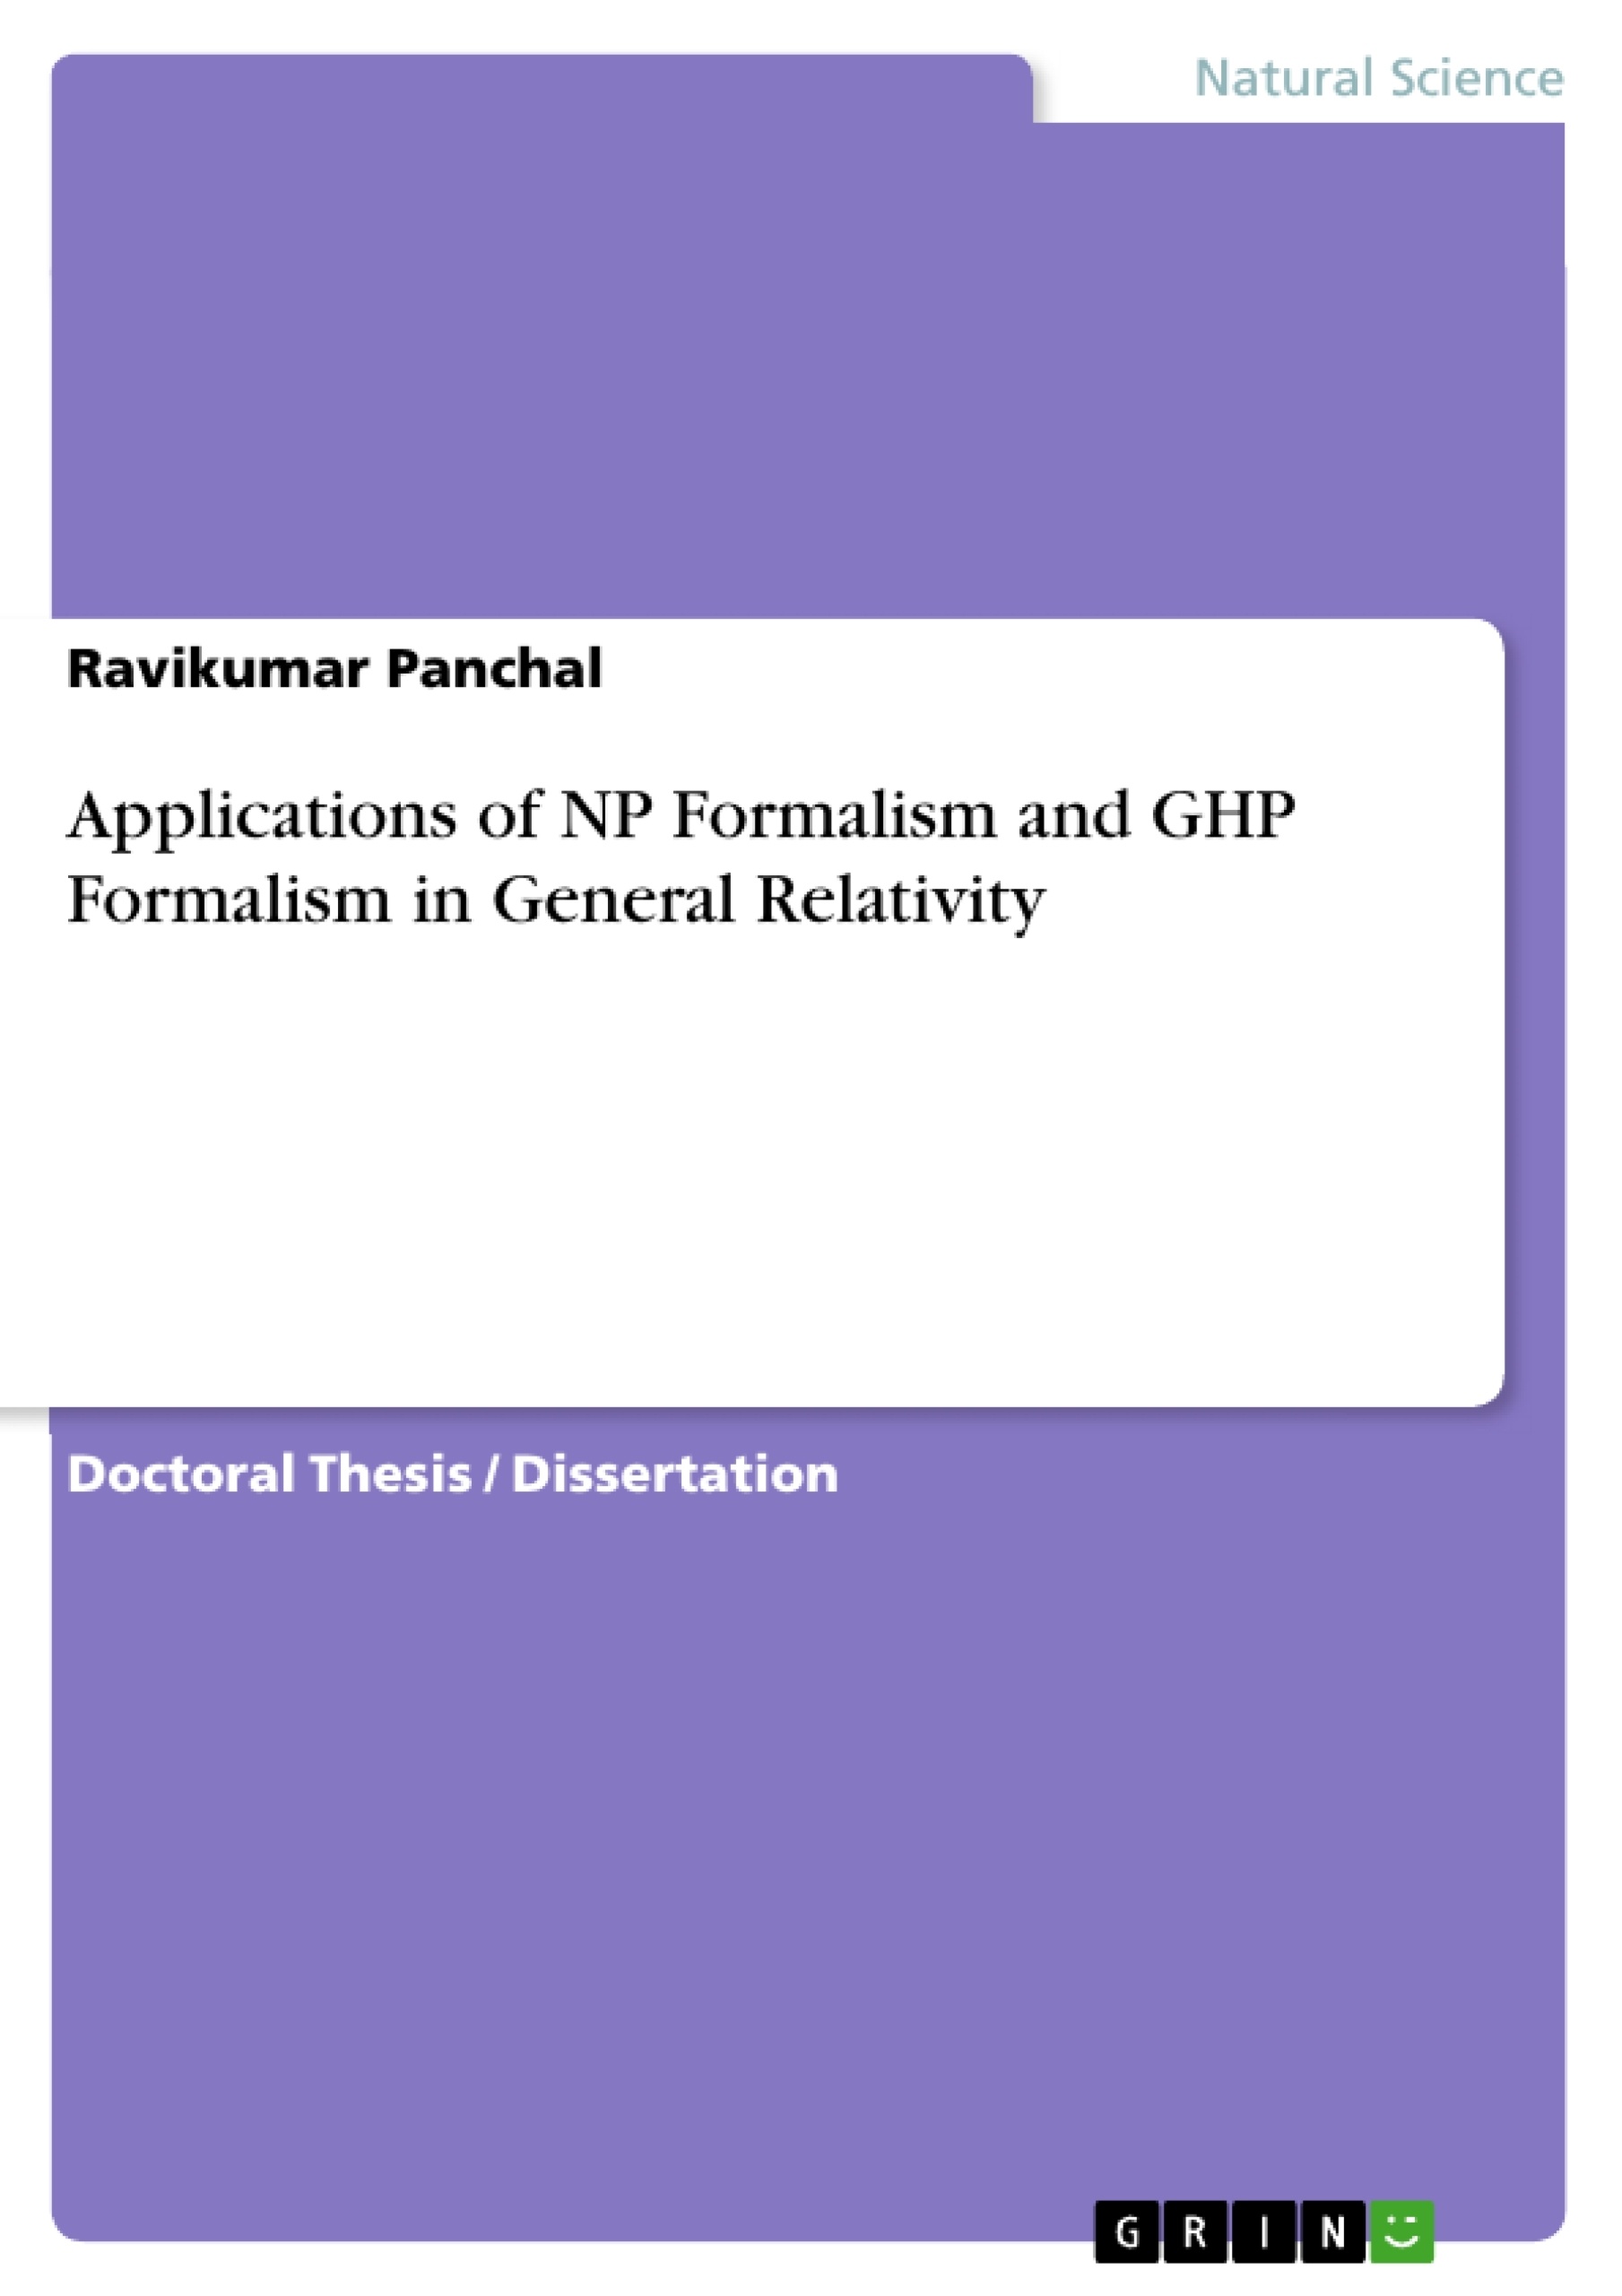 Title: Applications of NP Formalism and GHP Formalism in General Relativity